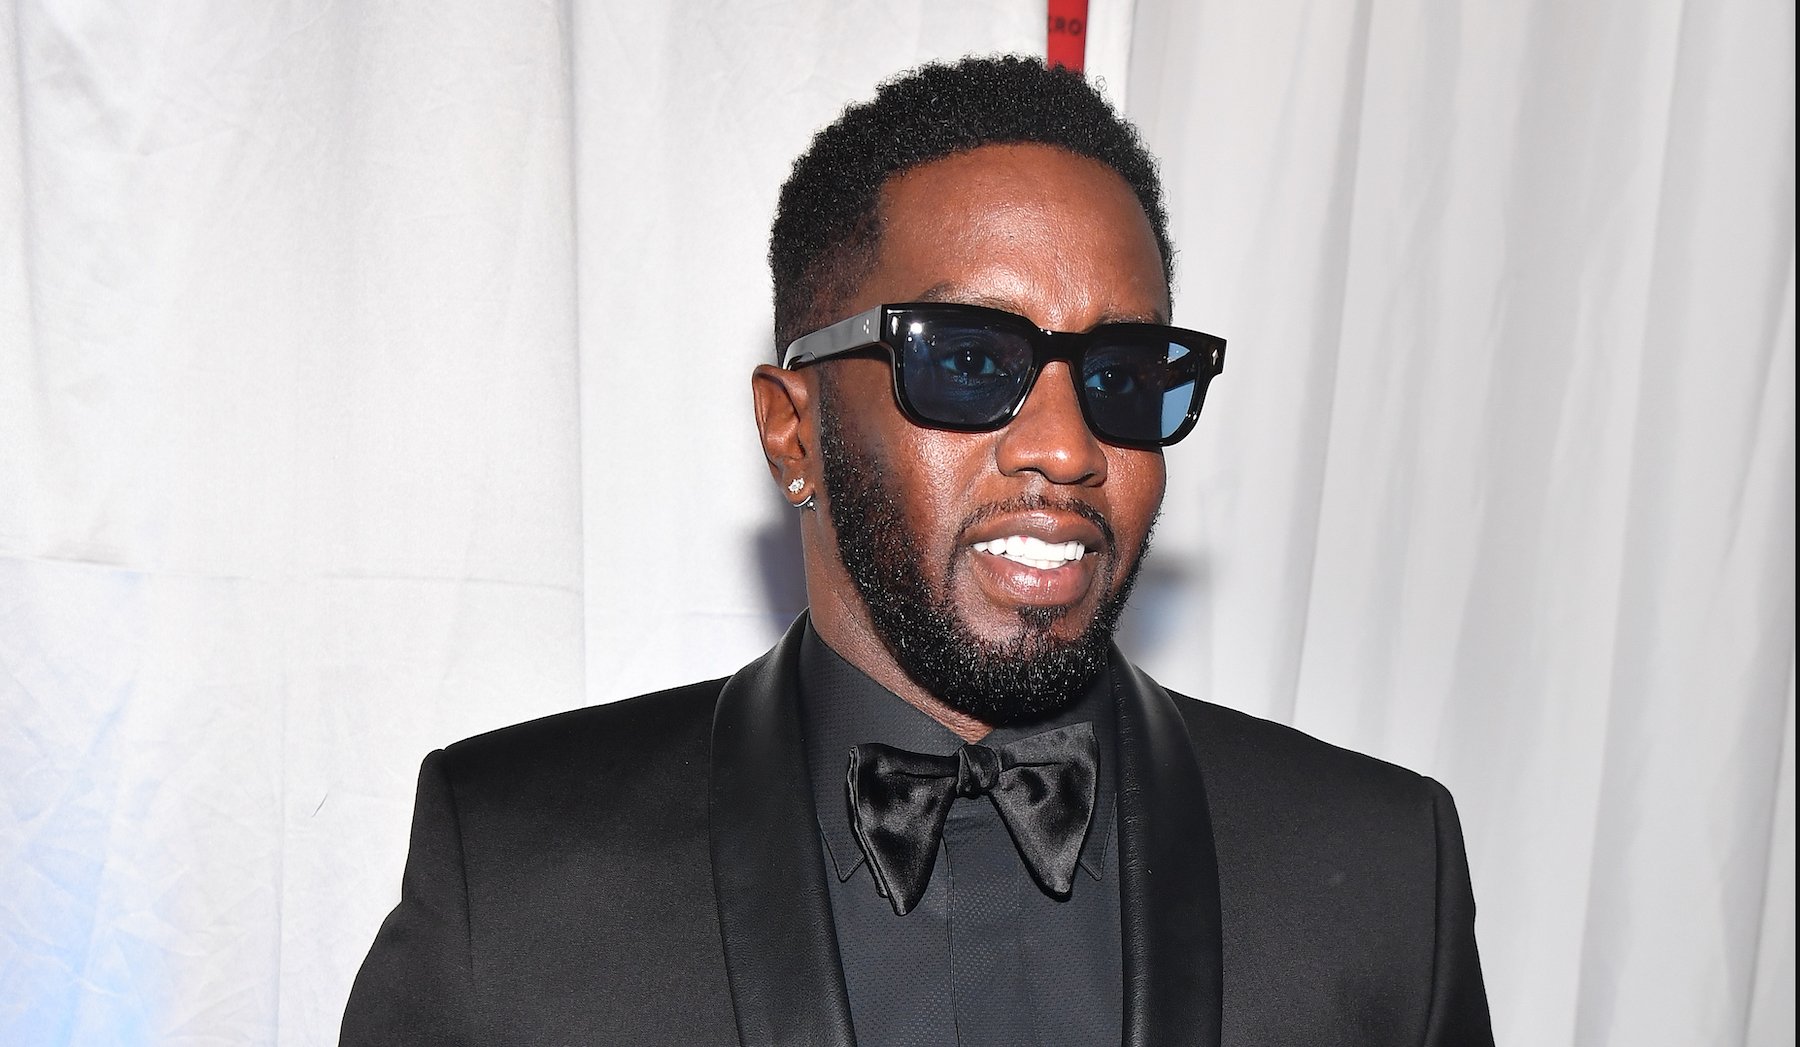 Sean "Diddy" Combs, who admitted to getting $5,000 haircuts every day, smiling for a photo